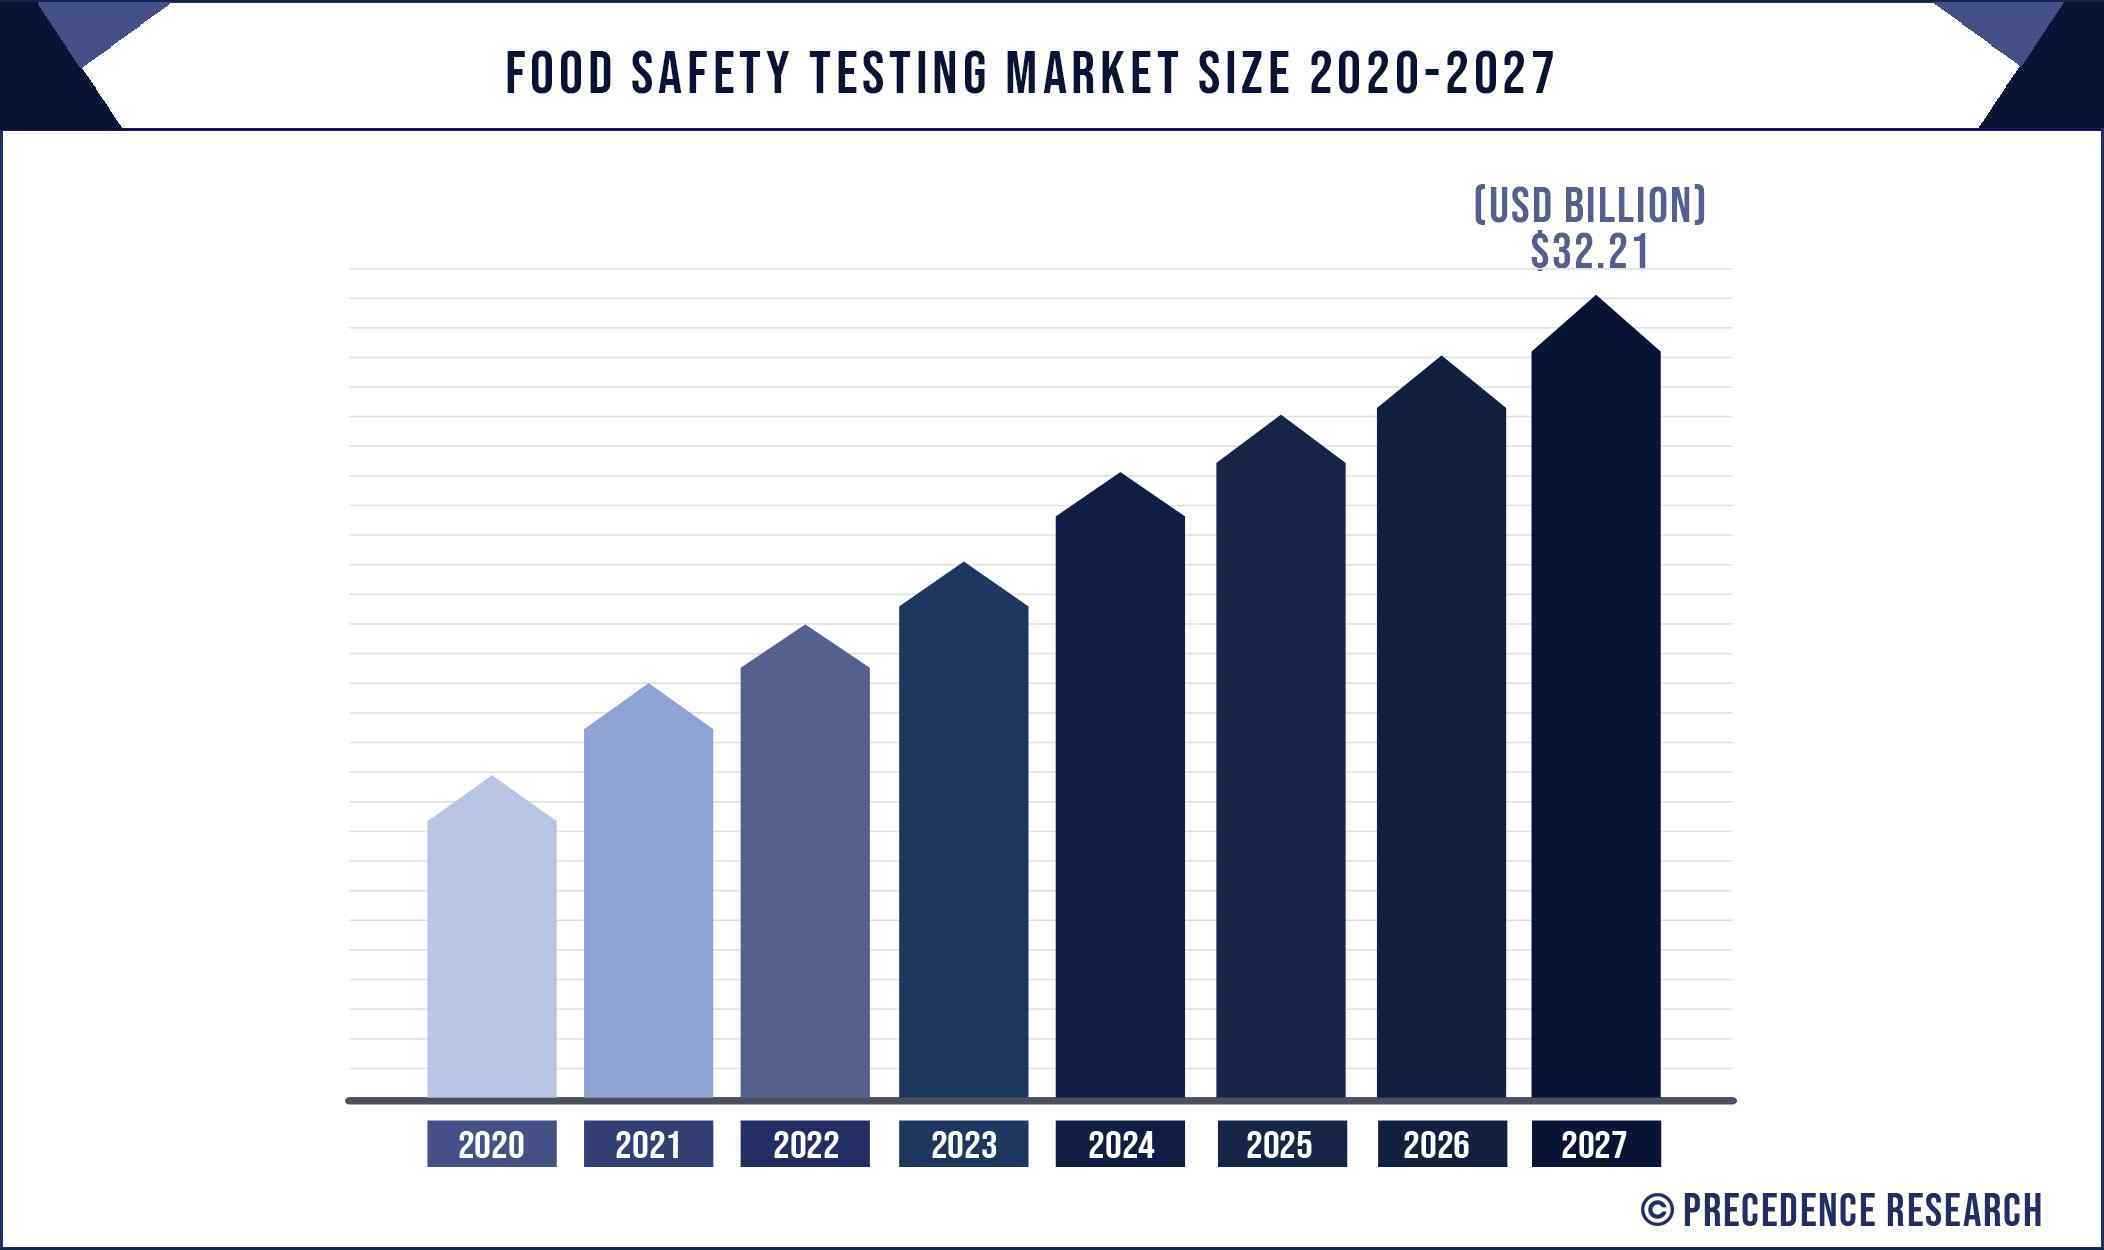 Food Safety Testing Market Size 2020 to 2027